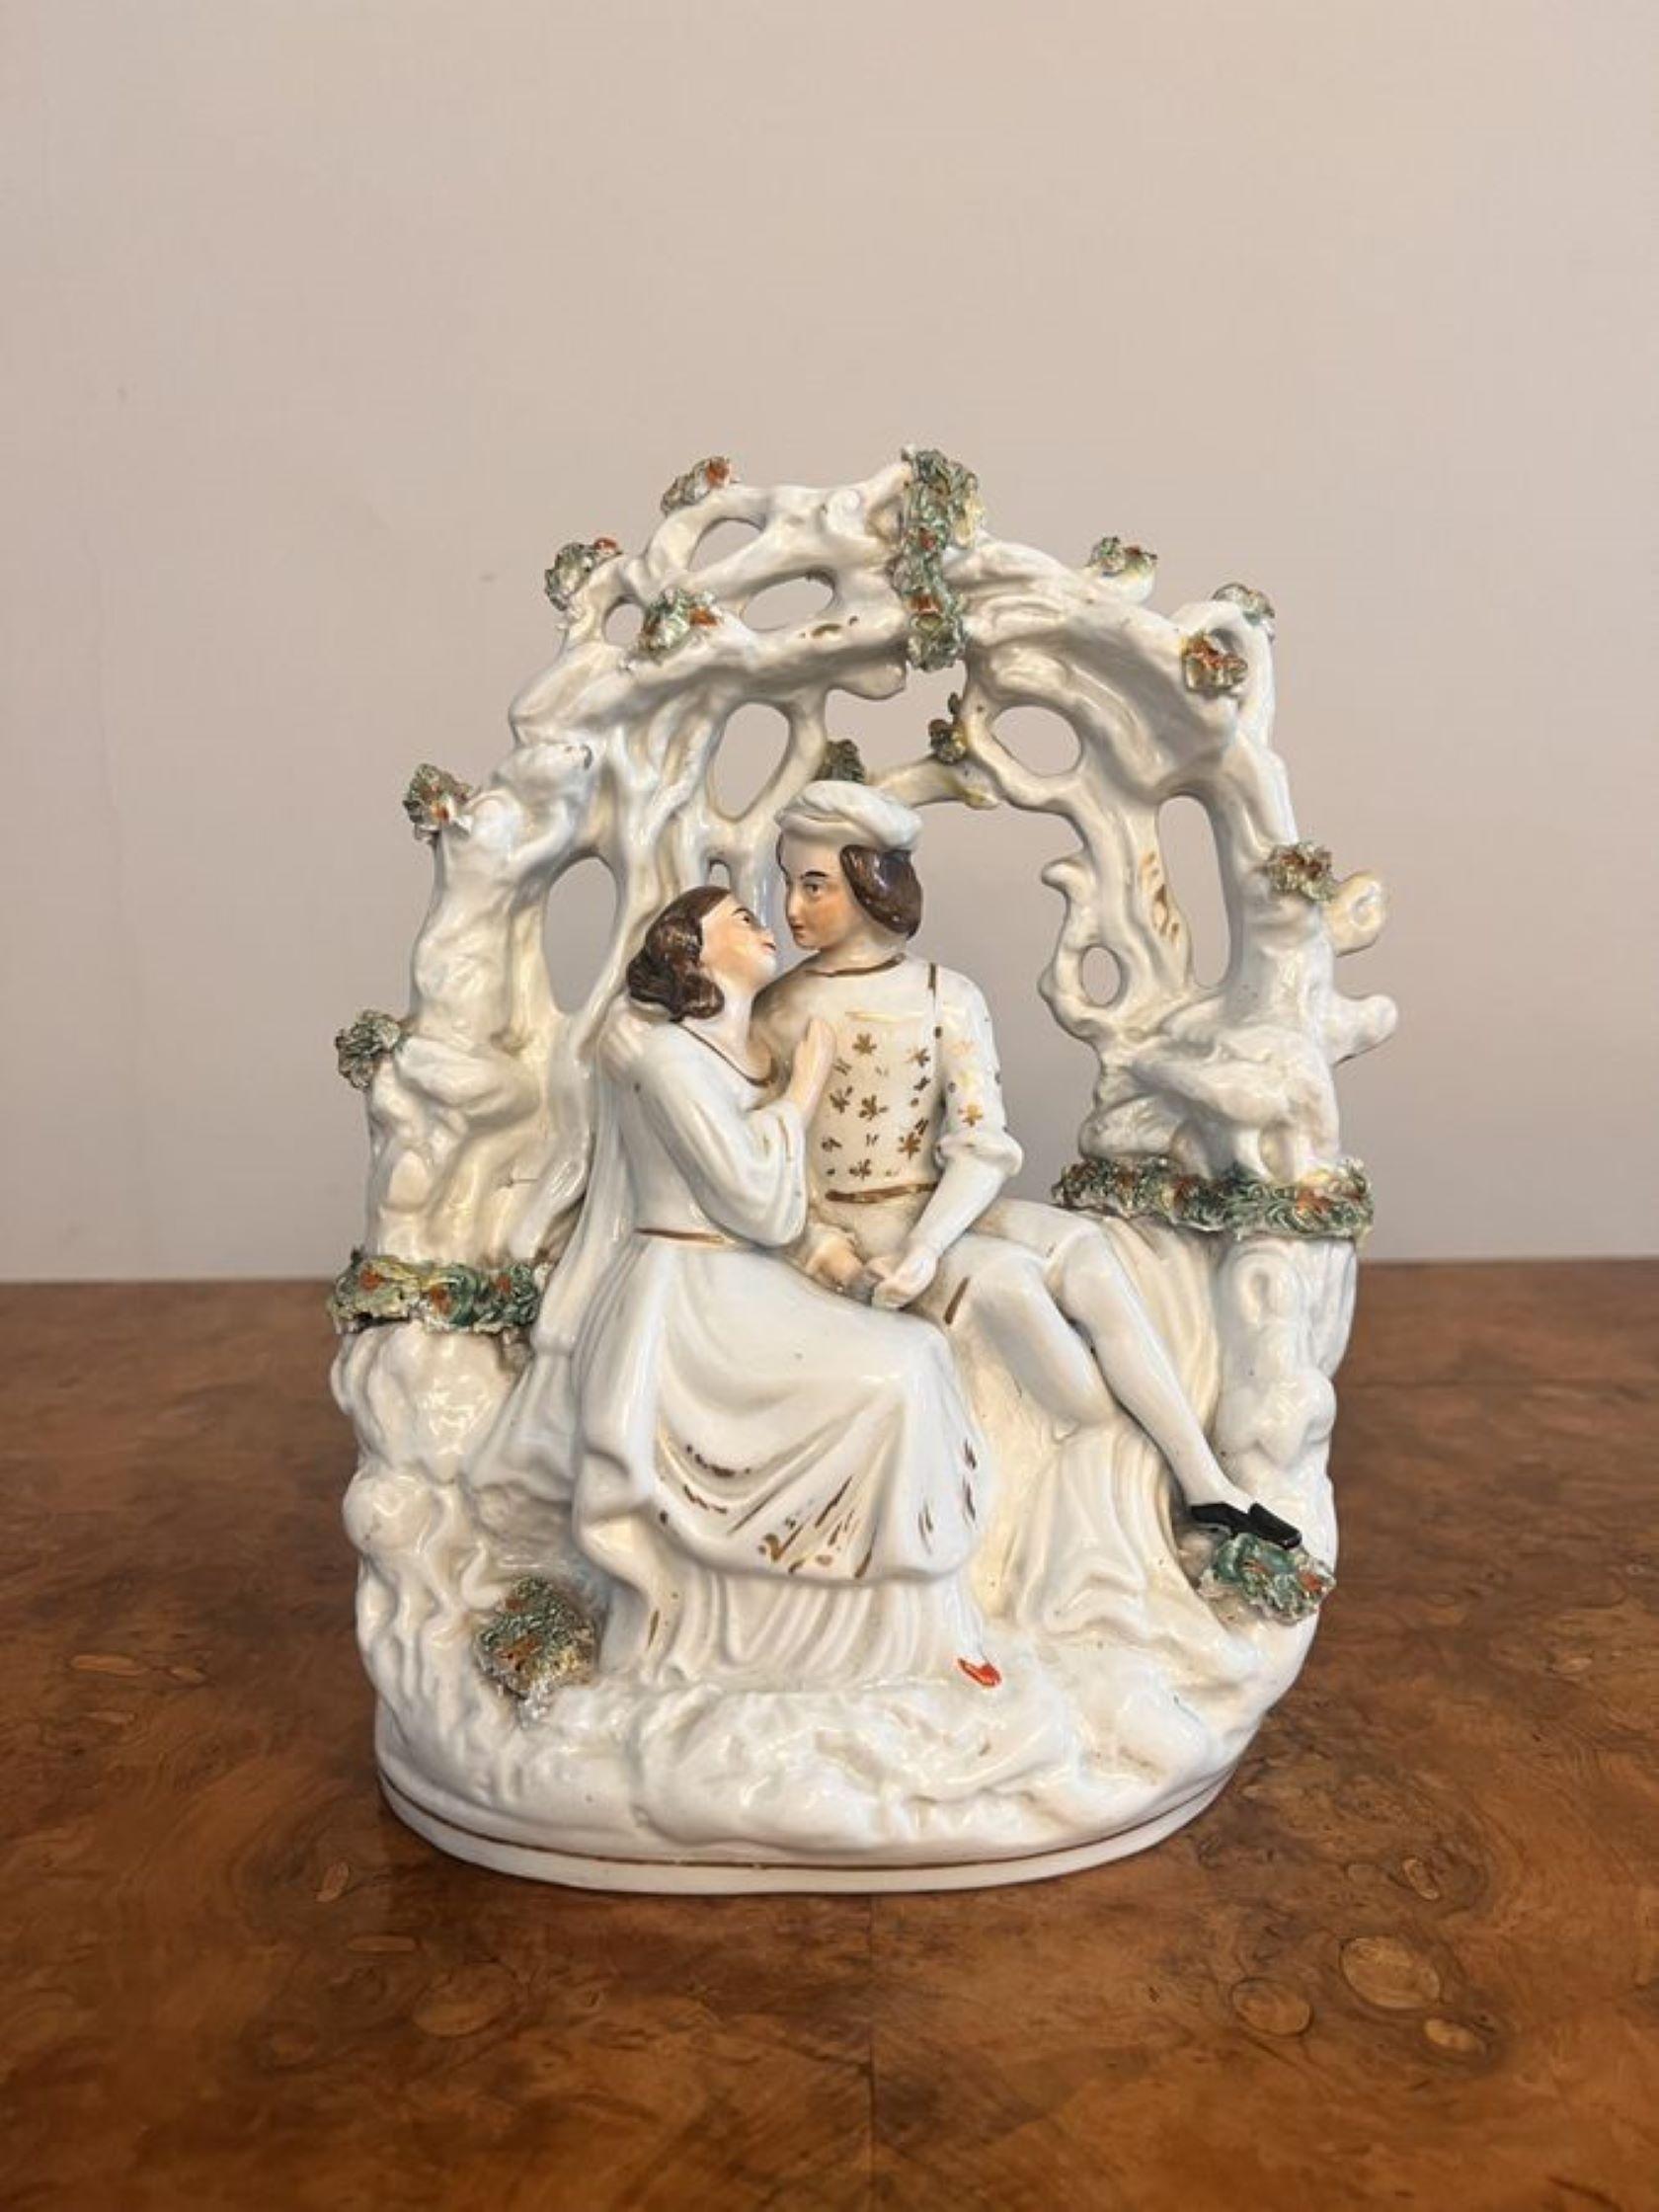 Stunning quality antique Victorian Staffordshire figure, having a quality Staffordshire figure of a man and woman seated in traditional clothing surrounded by foliage, hand painted in white, green and brown colours with gold gilded detail, raised on